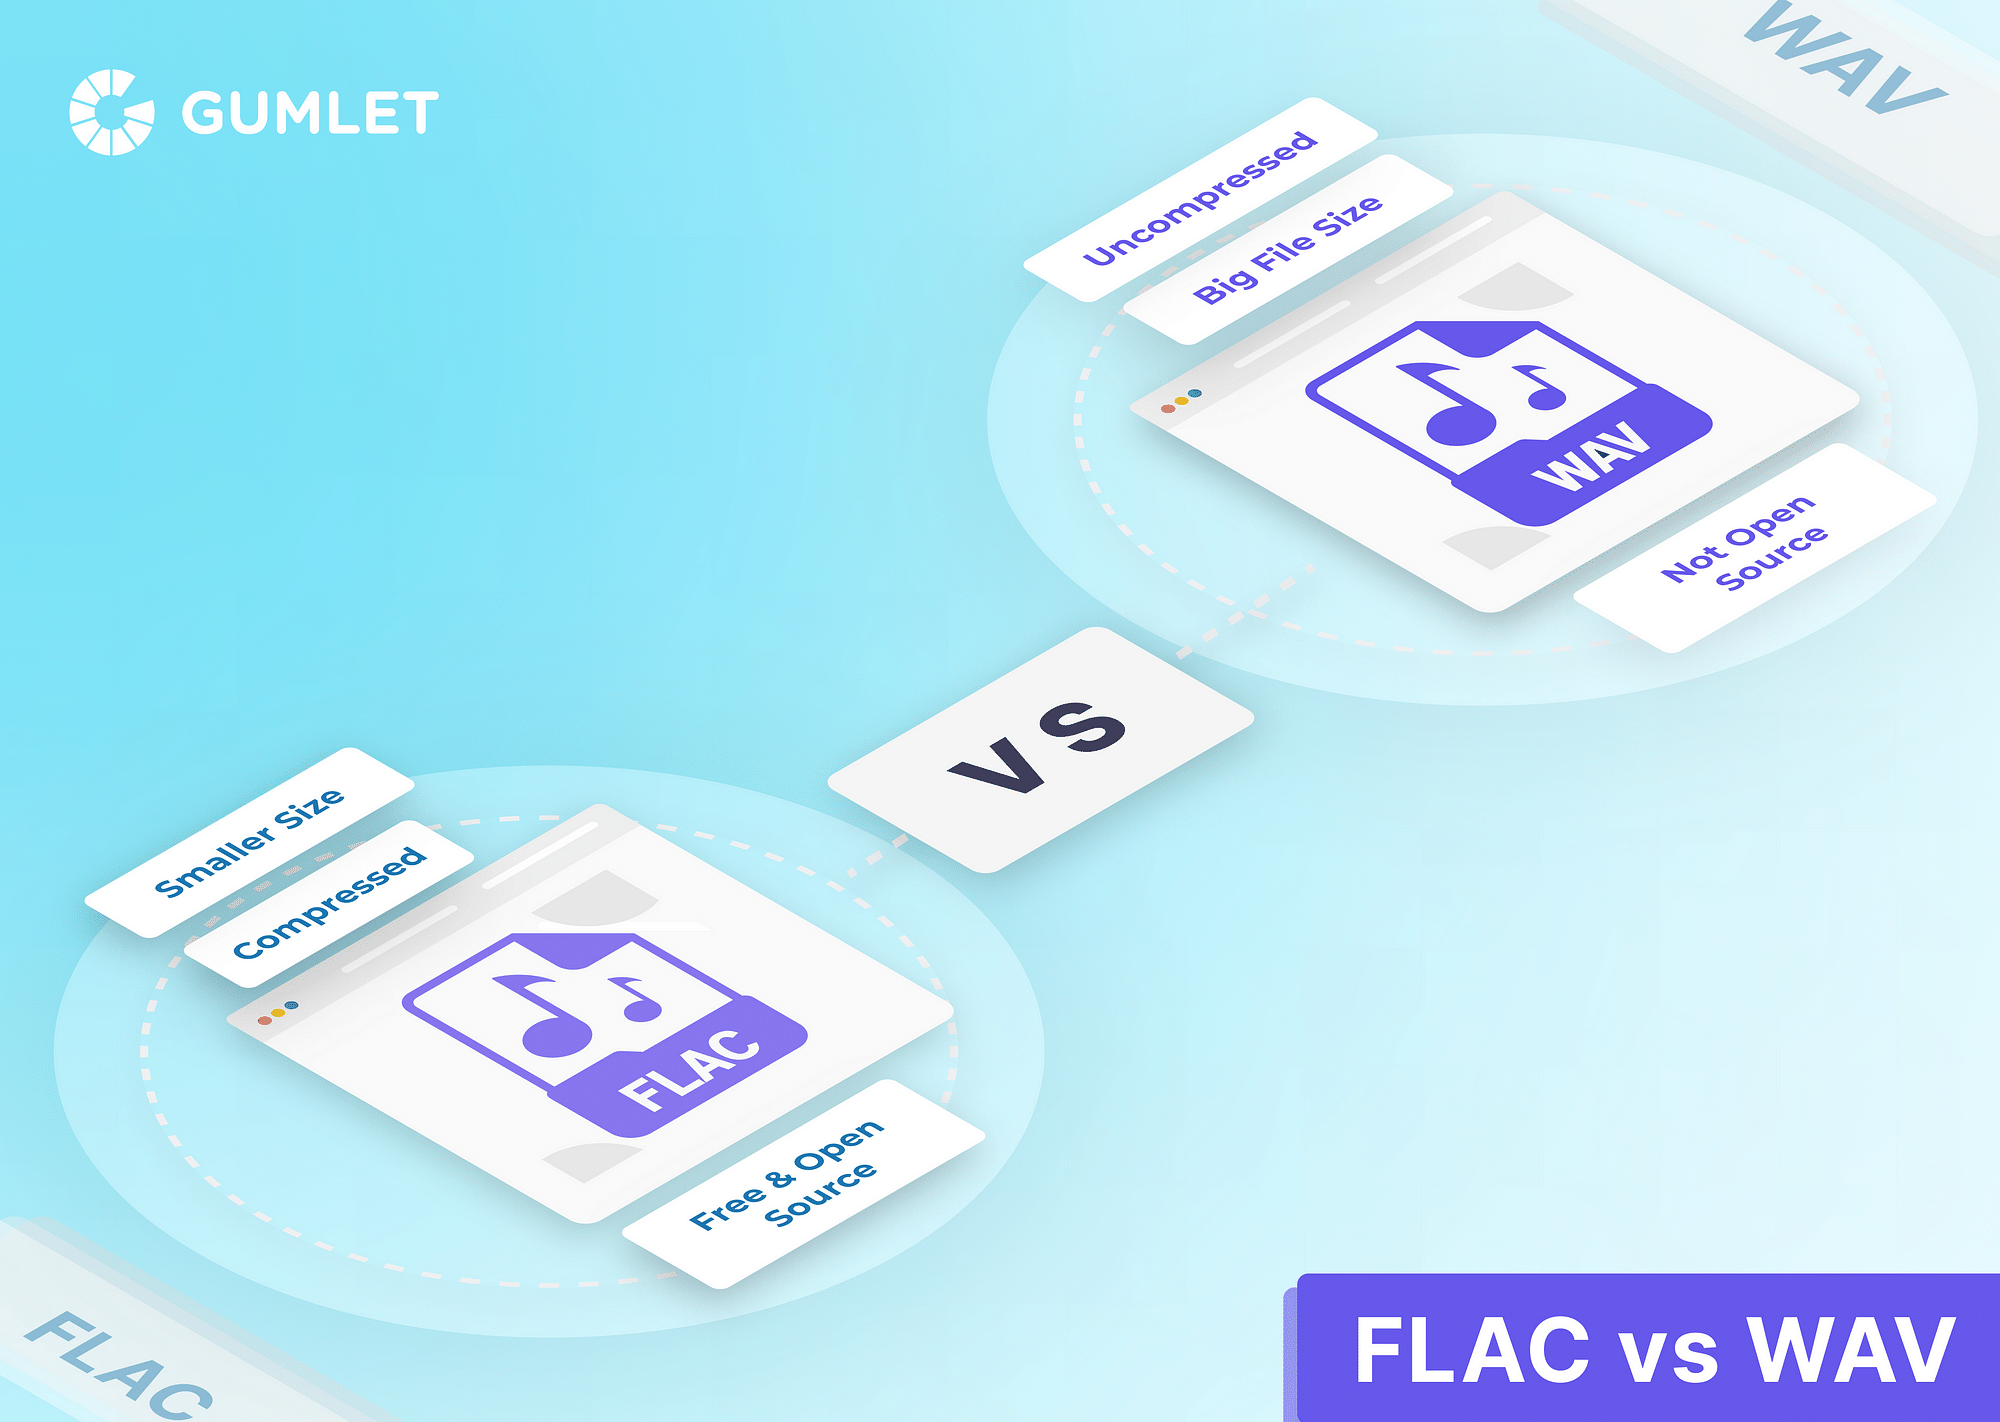 FLAC vs. WAV: The Battle of the Audio File Formats